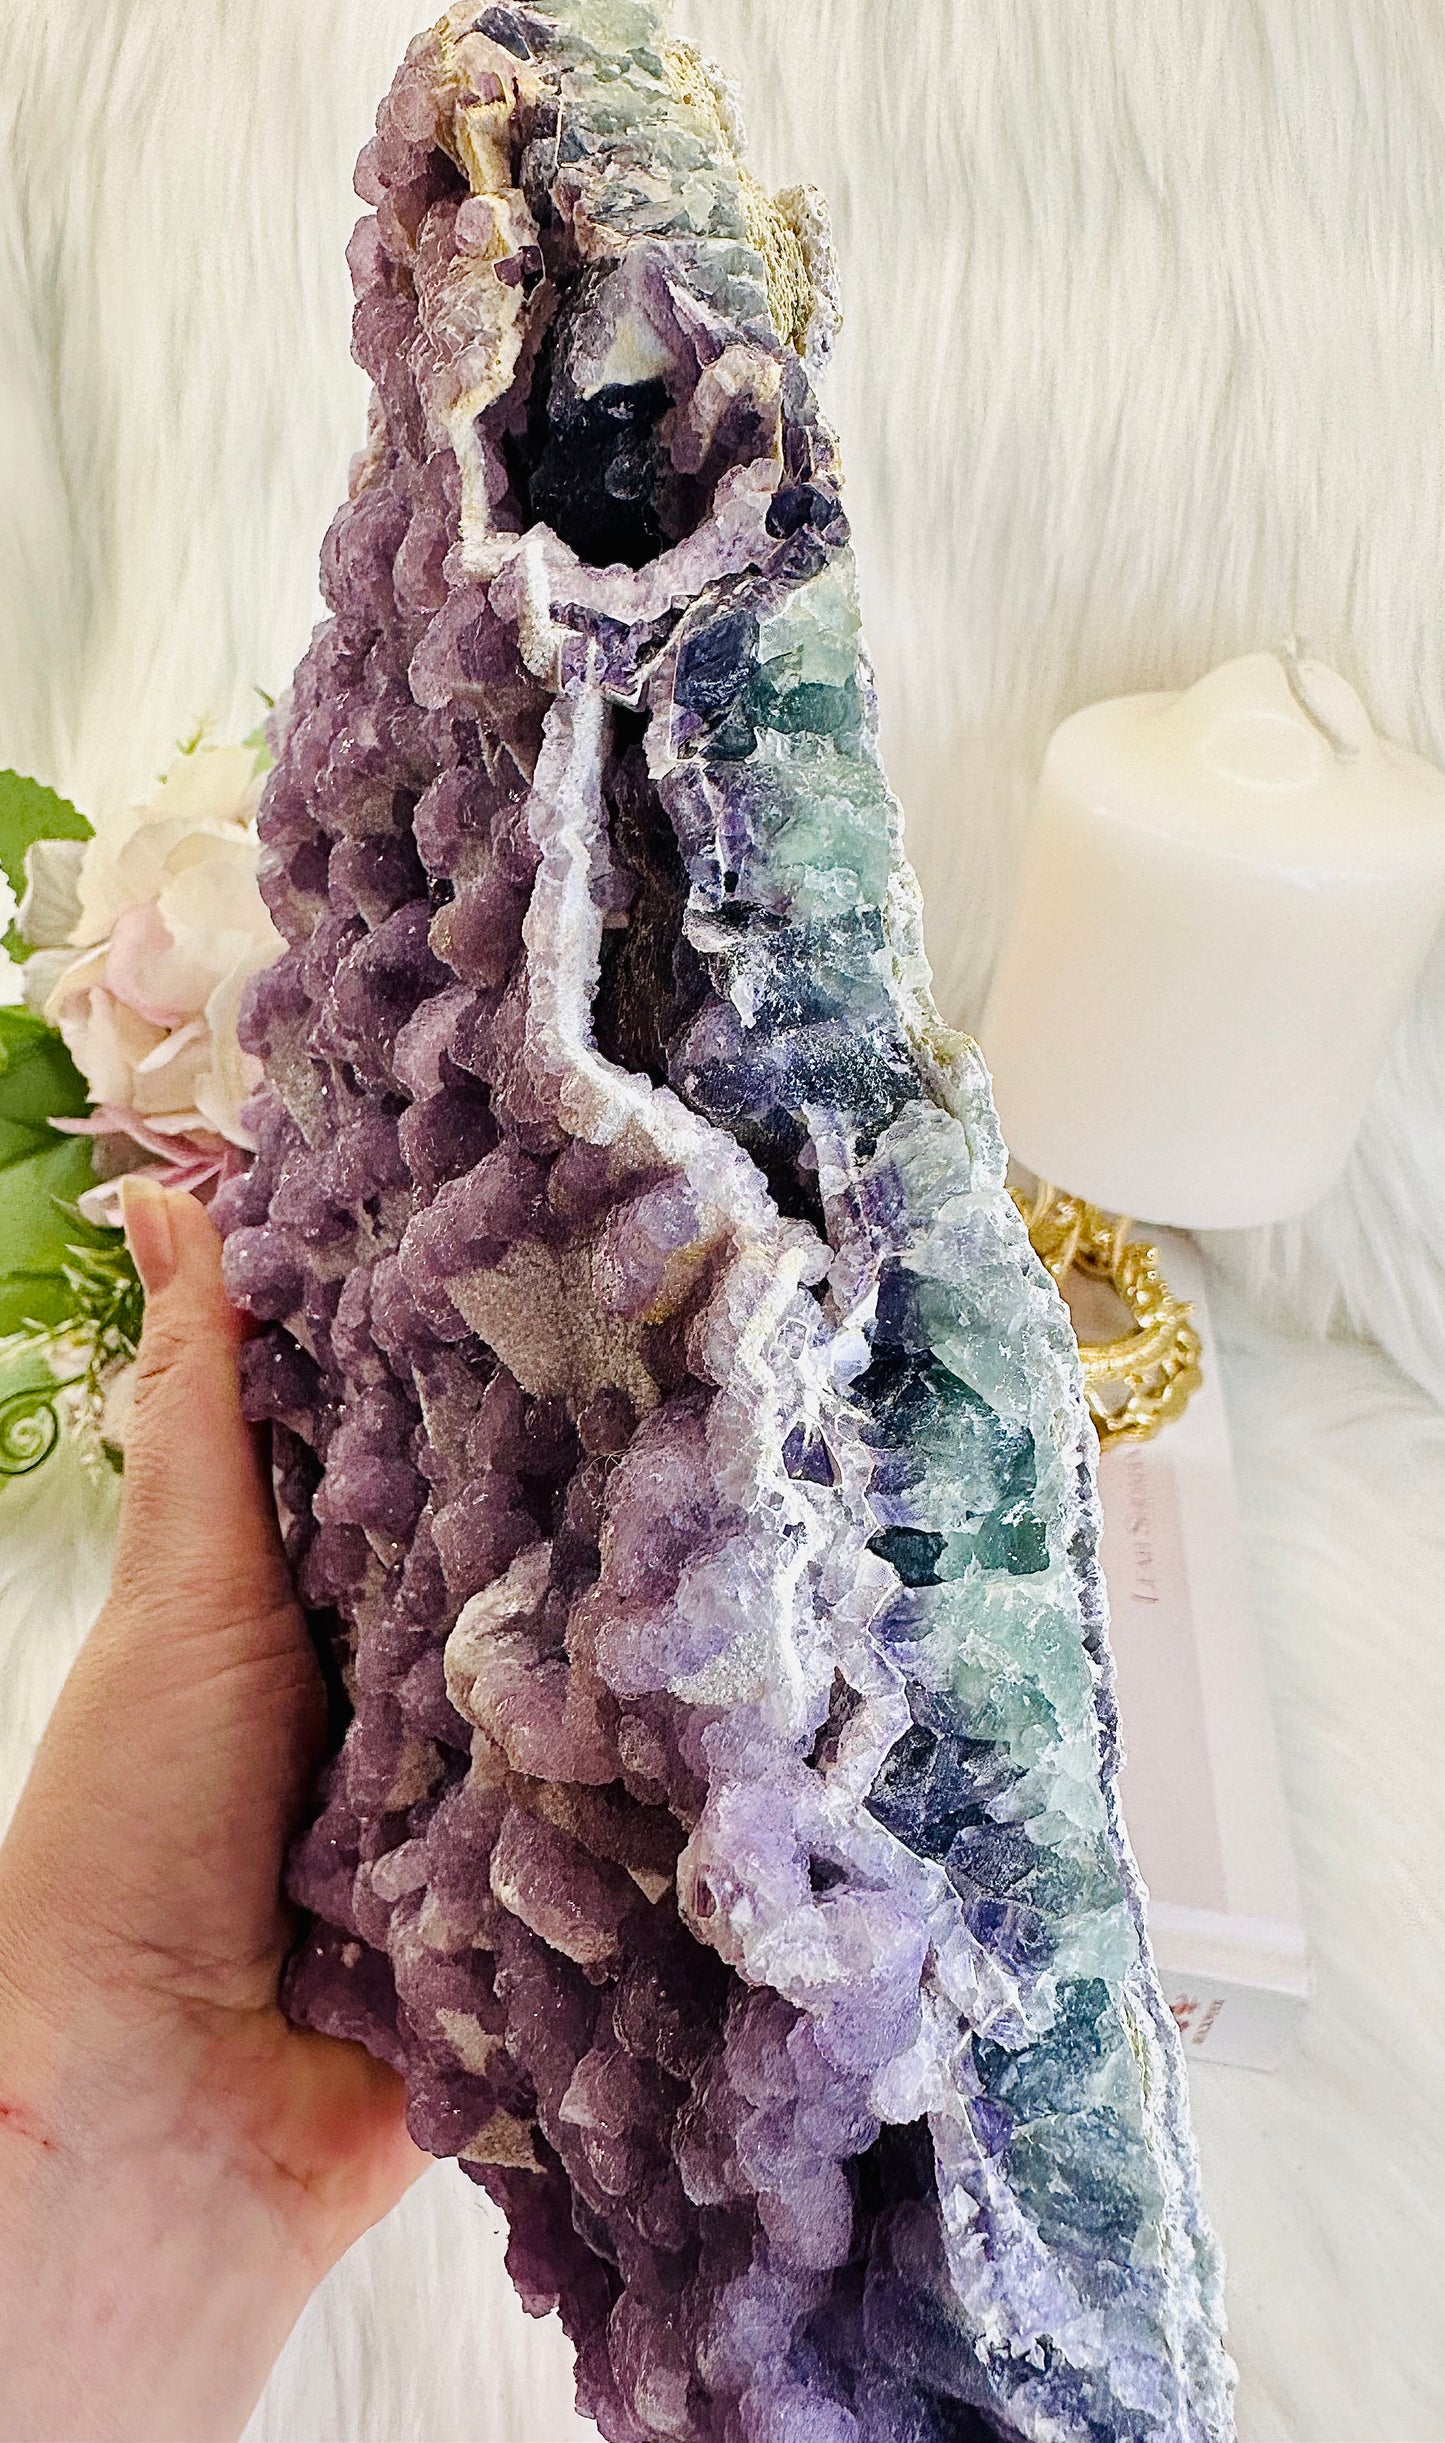 ⚜️ SALE ⚜️ Classy & Fabulous Ultimate Huge 2.8KG Natural Sugar Fluorite Specimen | Slab From Brazil, She Is Purple On Top With Rainbow Colours Through The Sides. She is 23cm & Is Magical Perfection!!!!